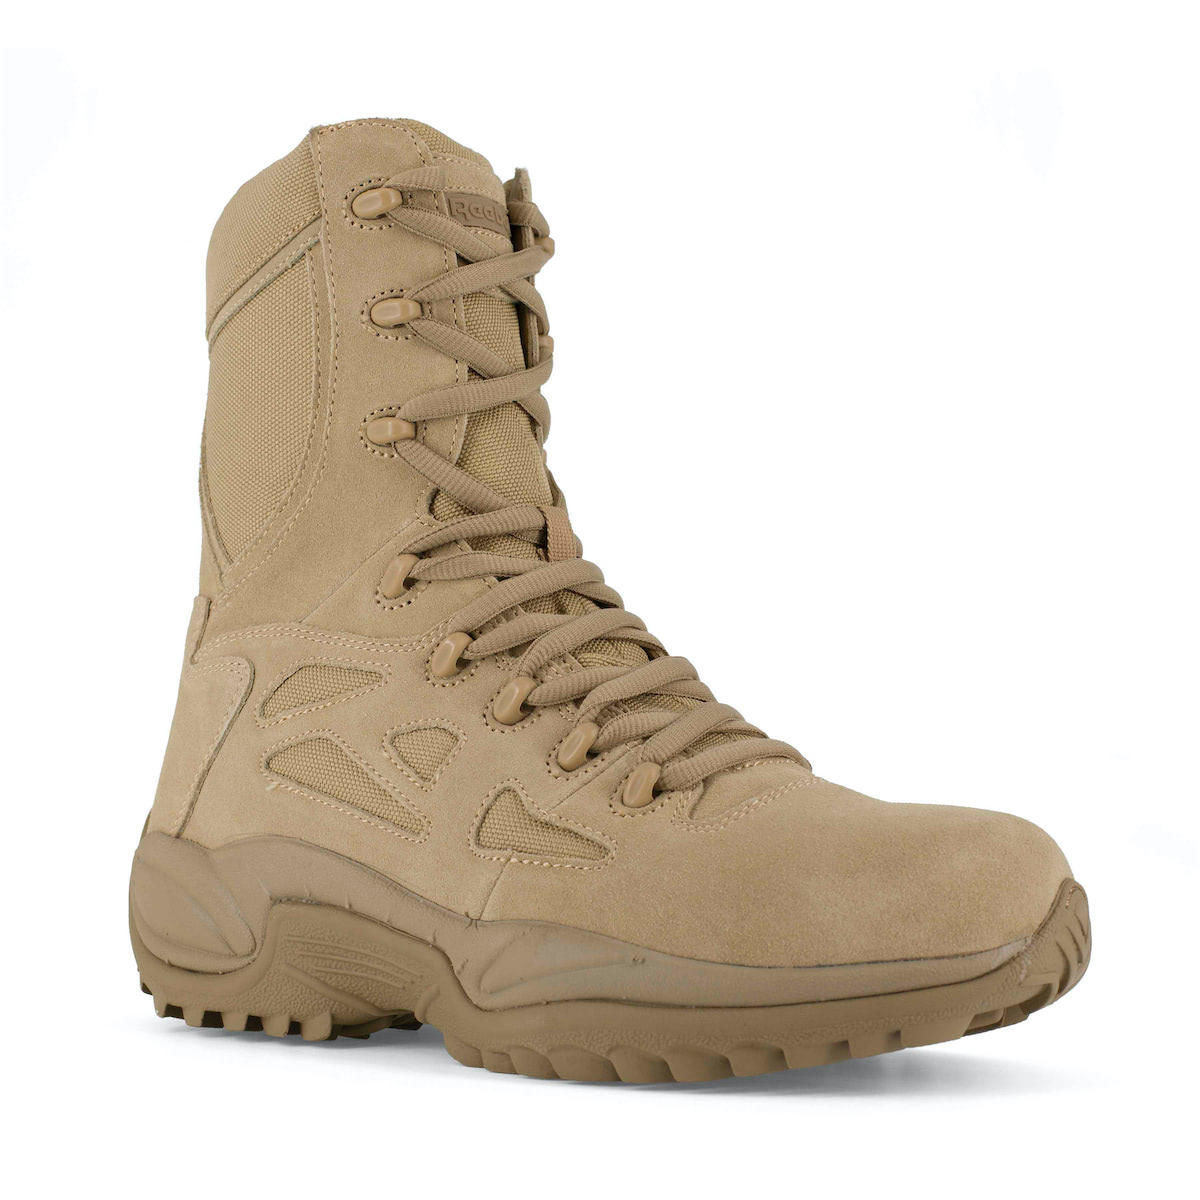 Visita lo Store di ReebokReebok Womens Coyote Leather Tactical Boots Rapid Response Laceup CT 